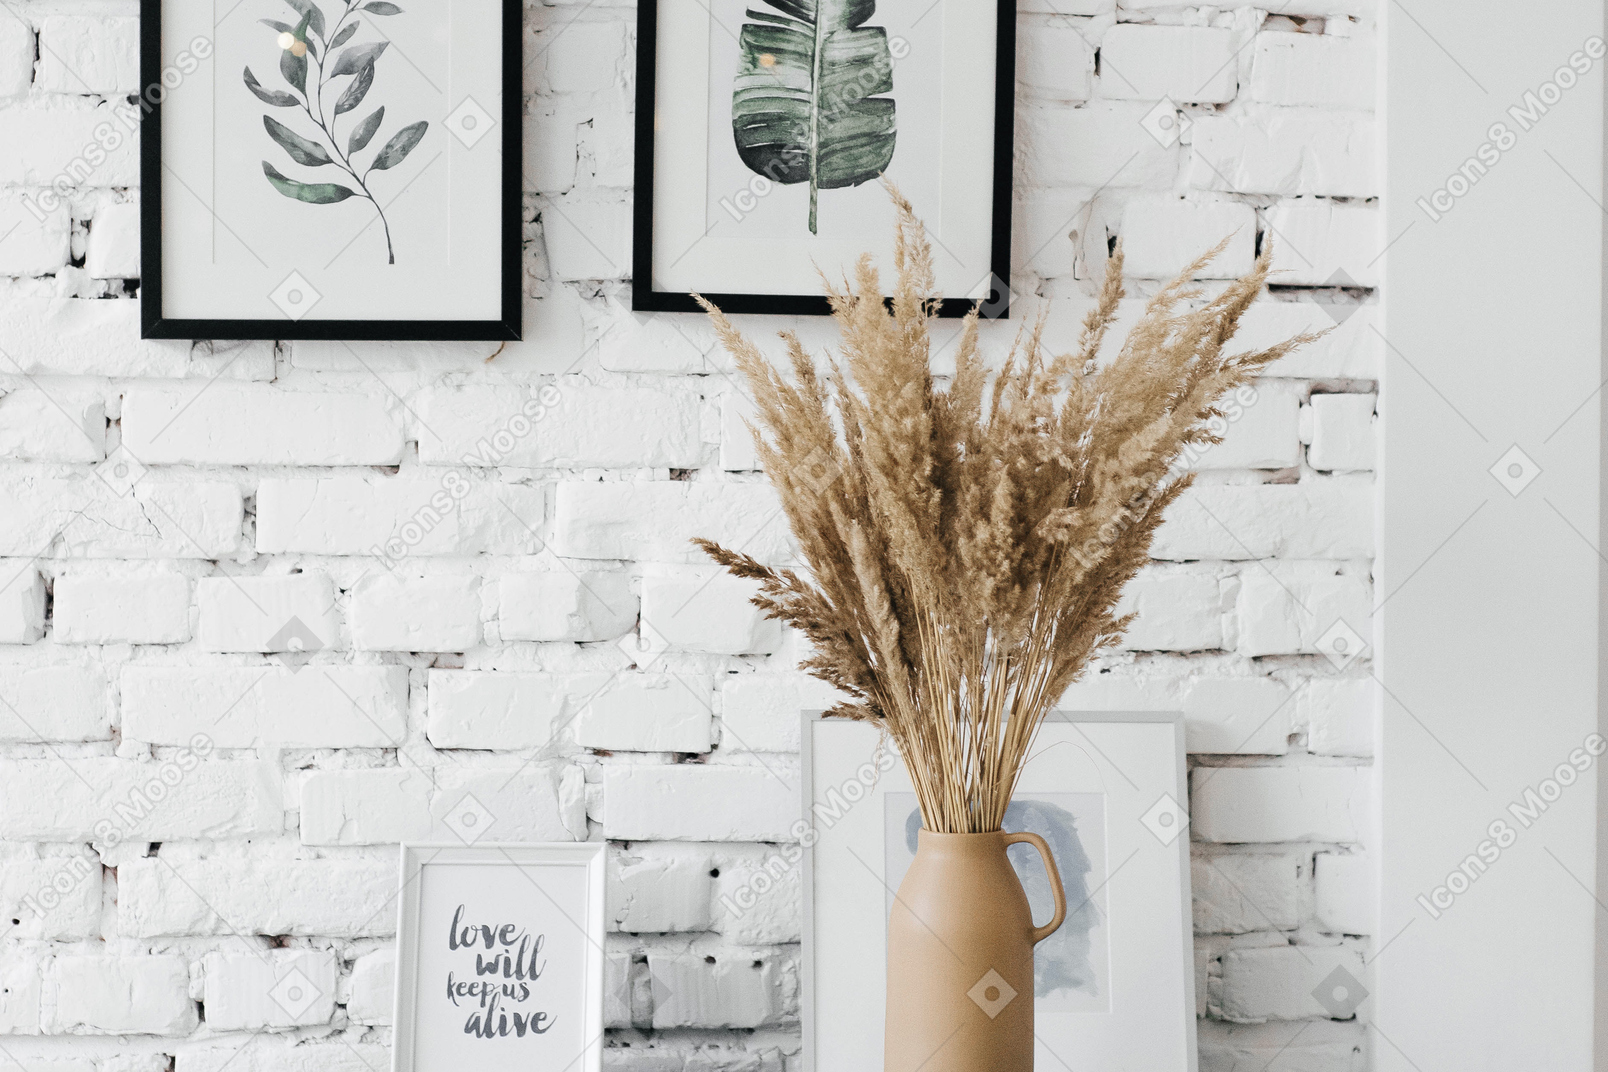 A vase filled with dry grass next to pictures on a wall